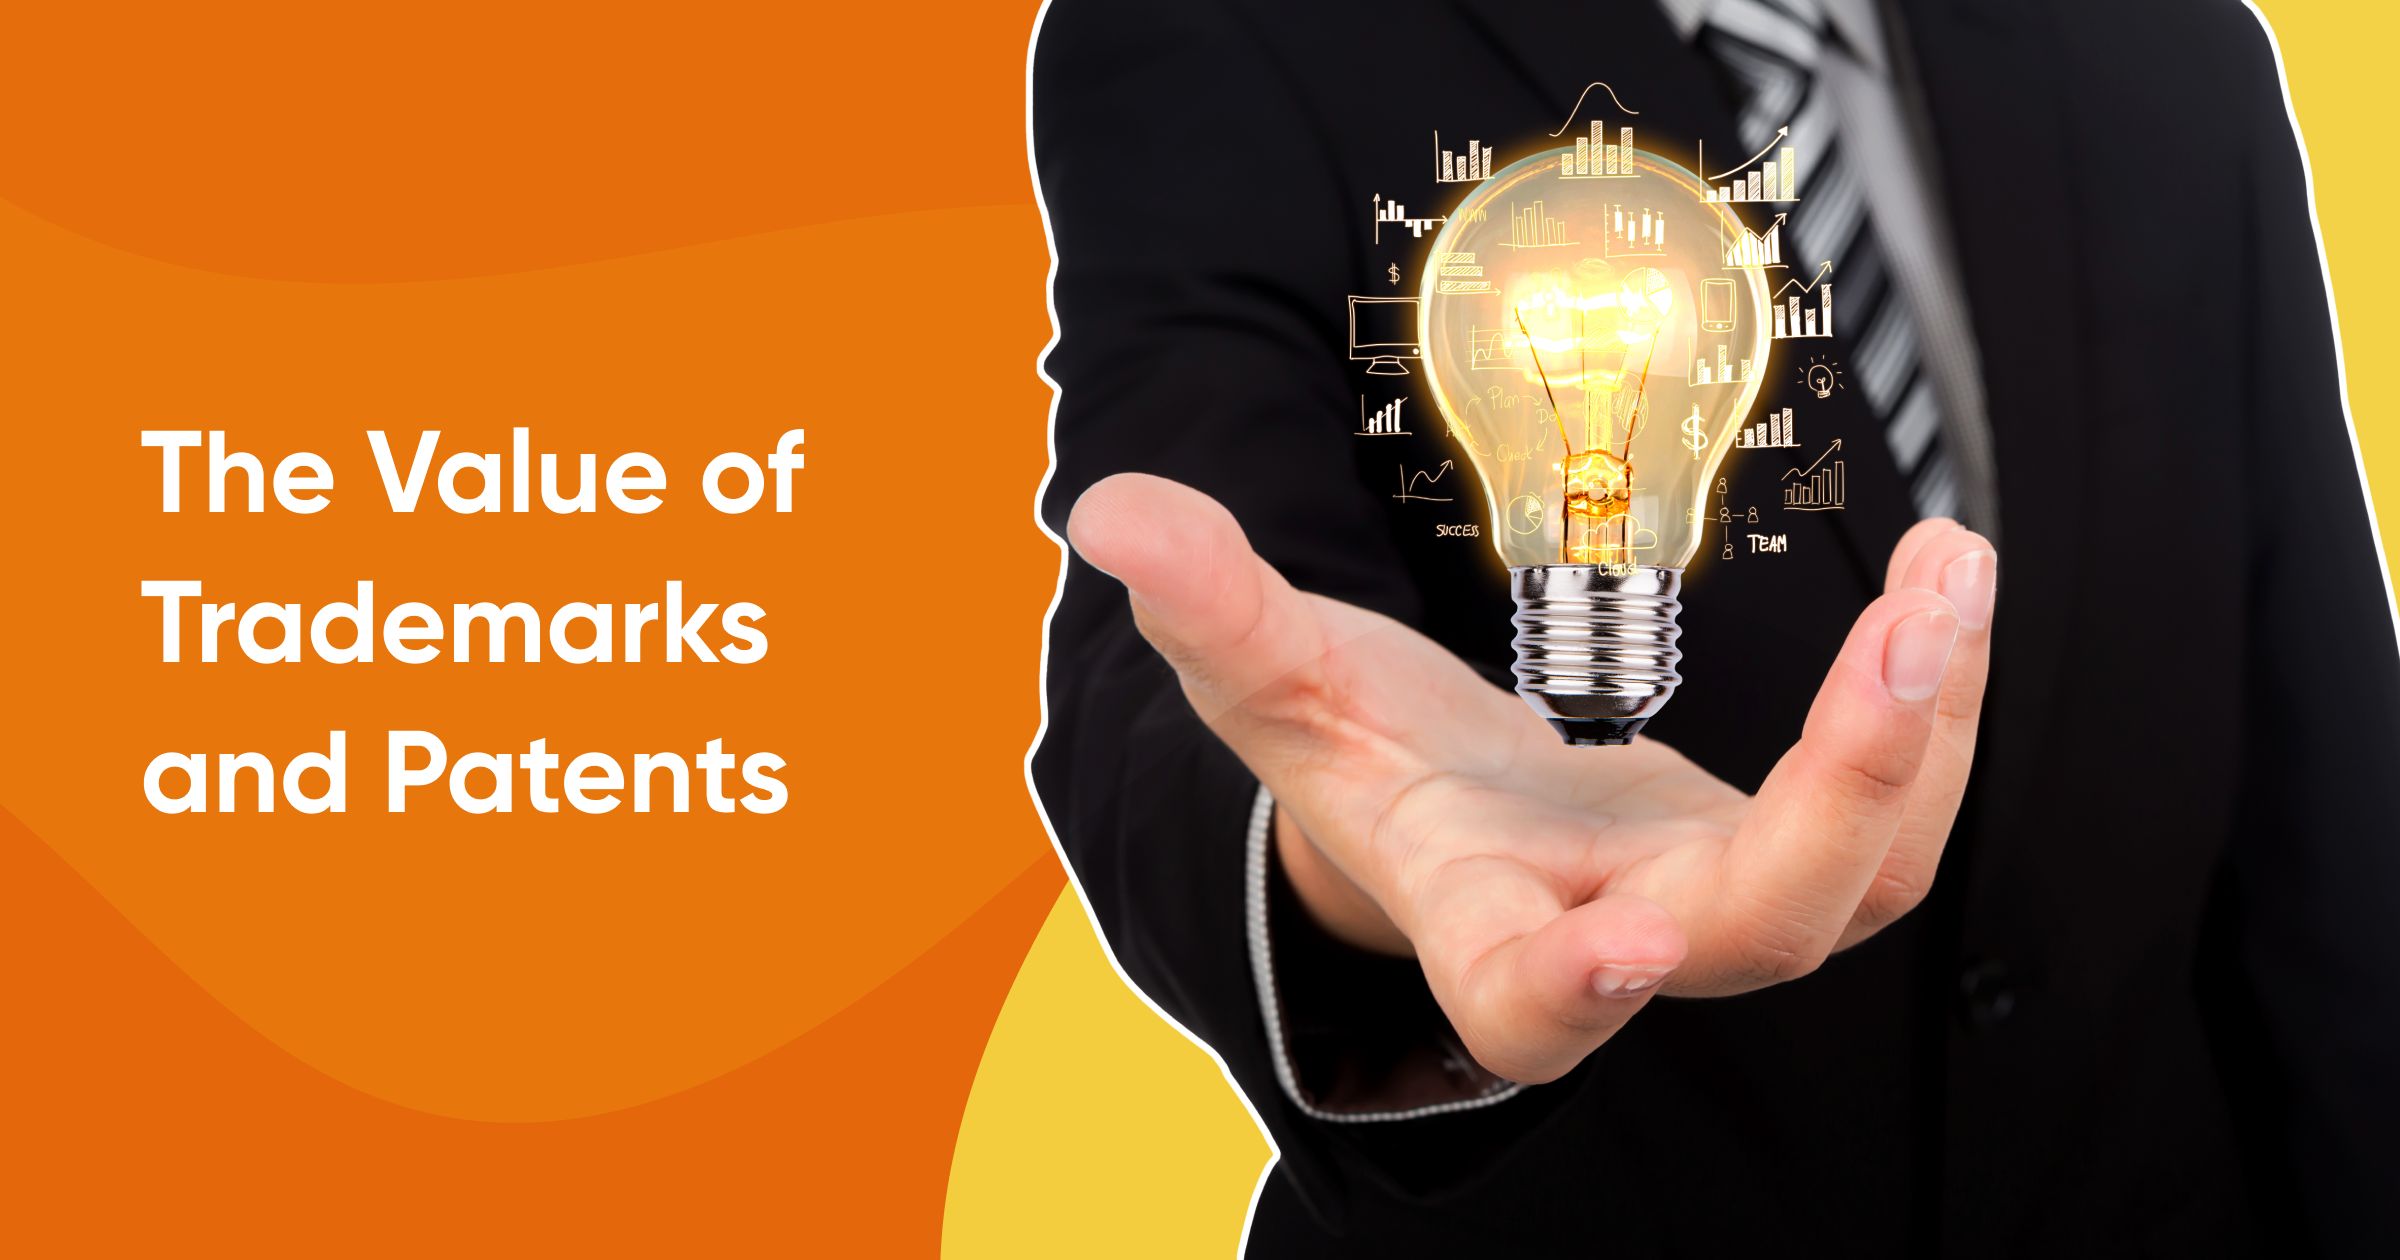 The Value of Trademarks and Patents